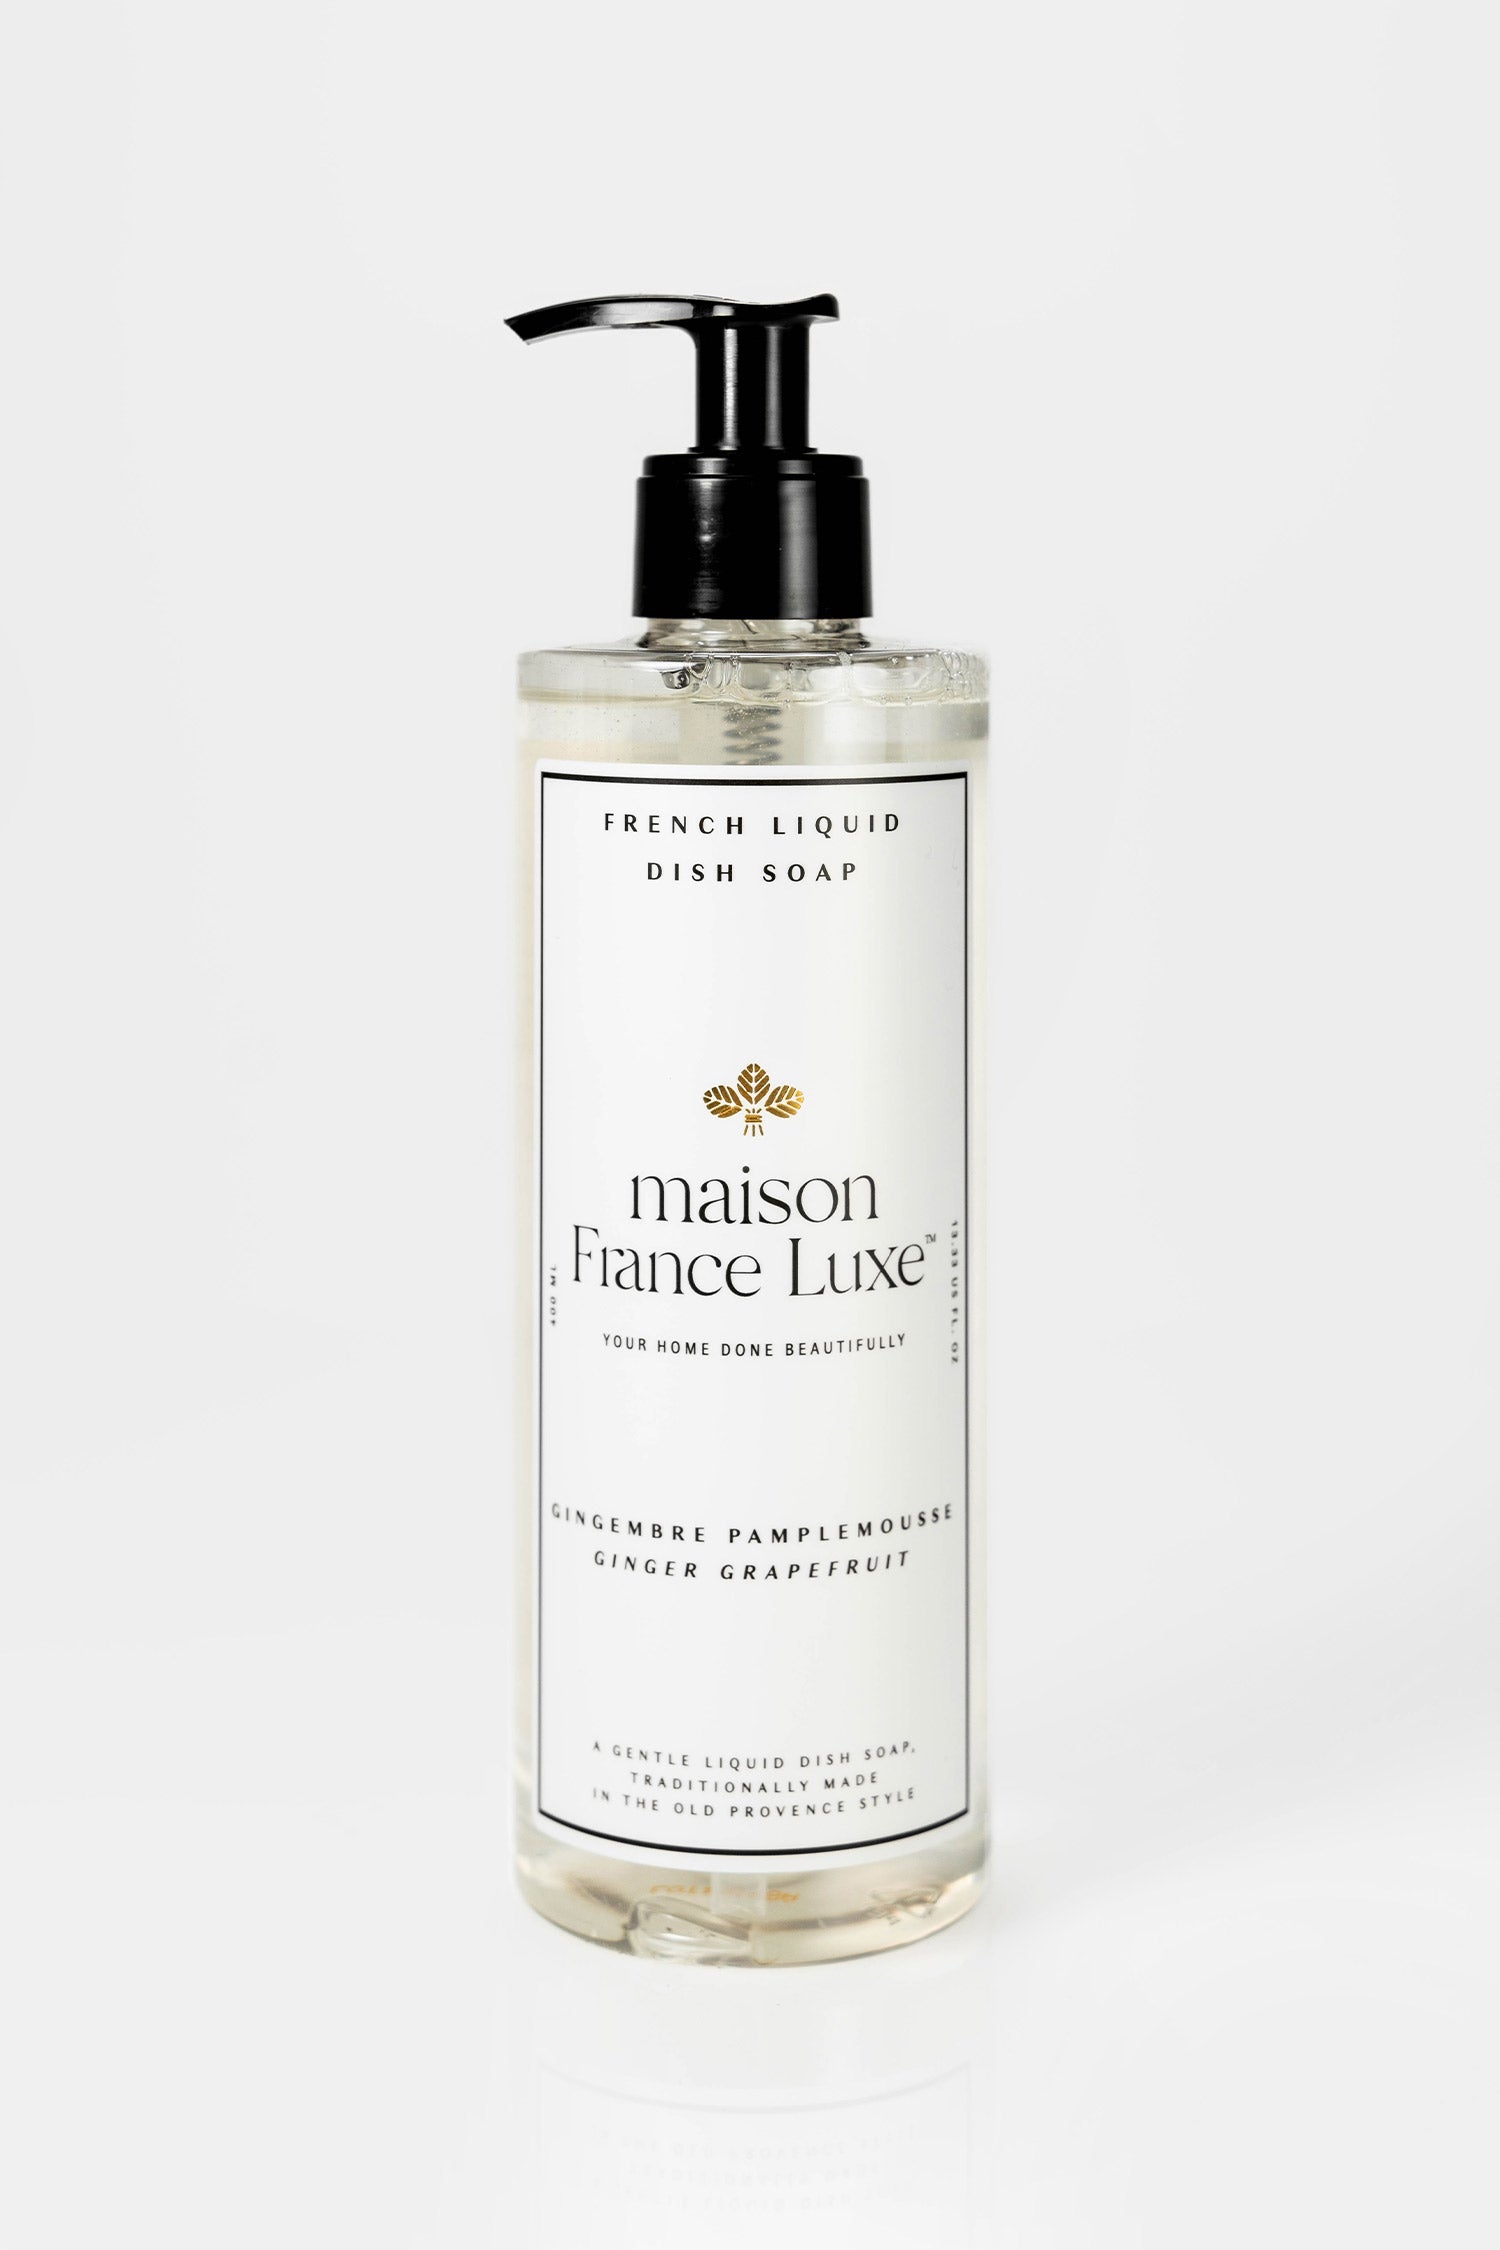 Natural Dish soap made in France with a Ginger Grapefruit scent and plant-based ingredients.